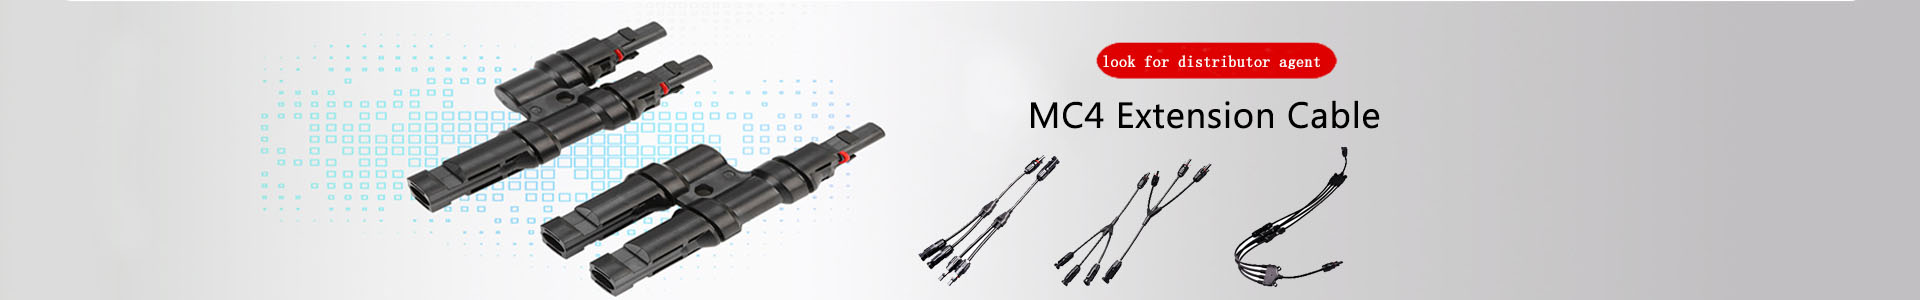 mc4 male/female solar panel connector-Company news-Solar | solar connector,solar branch connector,diode fuse connector,MC4 extnsion cable,H1Z2Z2 solar cable, UL4703 solar cable | Leading manufacturer and supplier of solar pv cables and connectors